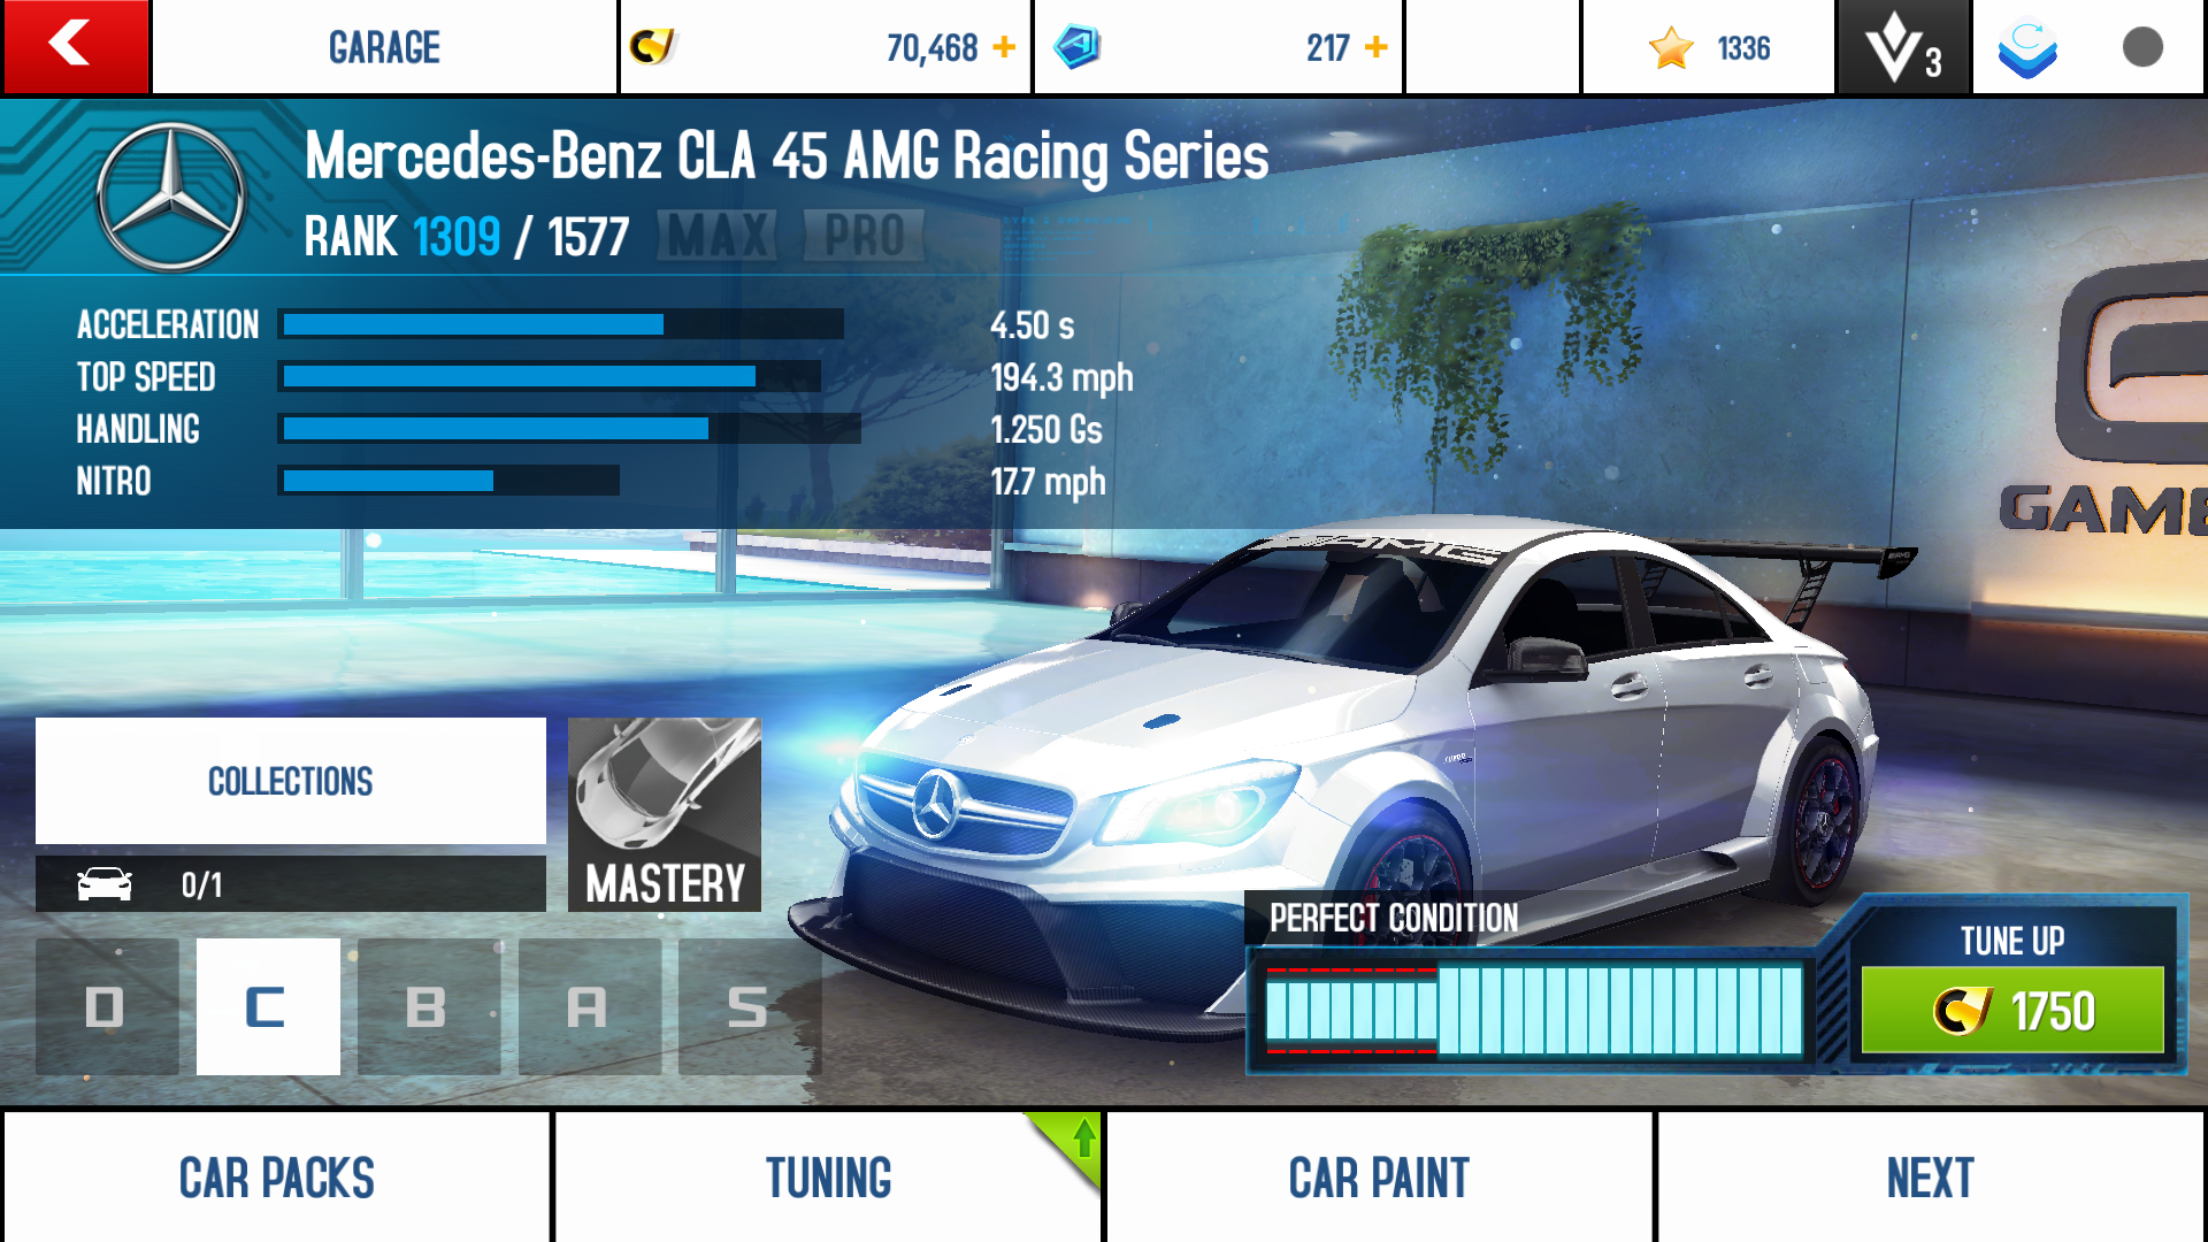 A8A_Mercedes-Benz_CLA_45_AMG_Racing_Series_stock.png